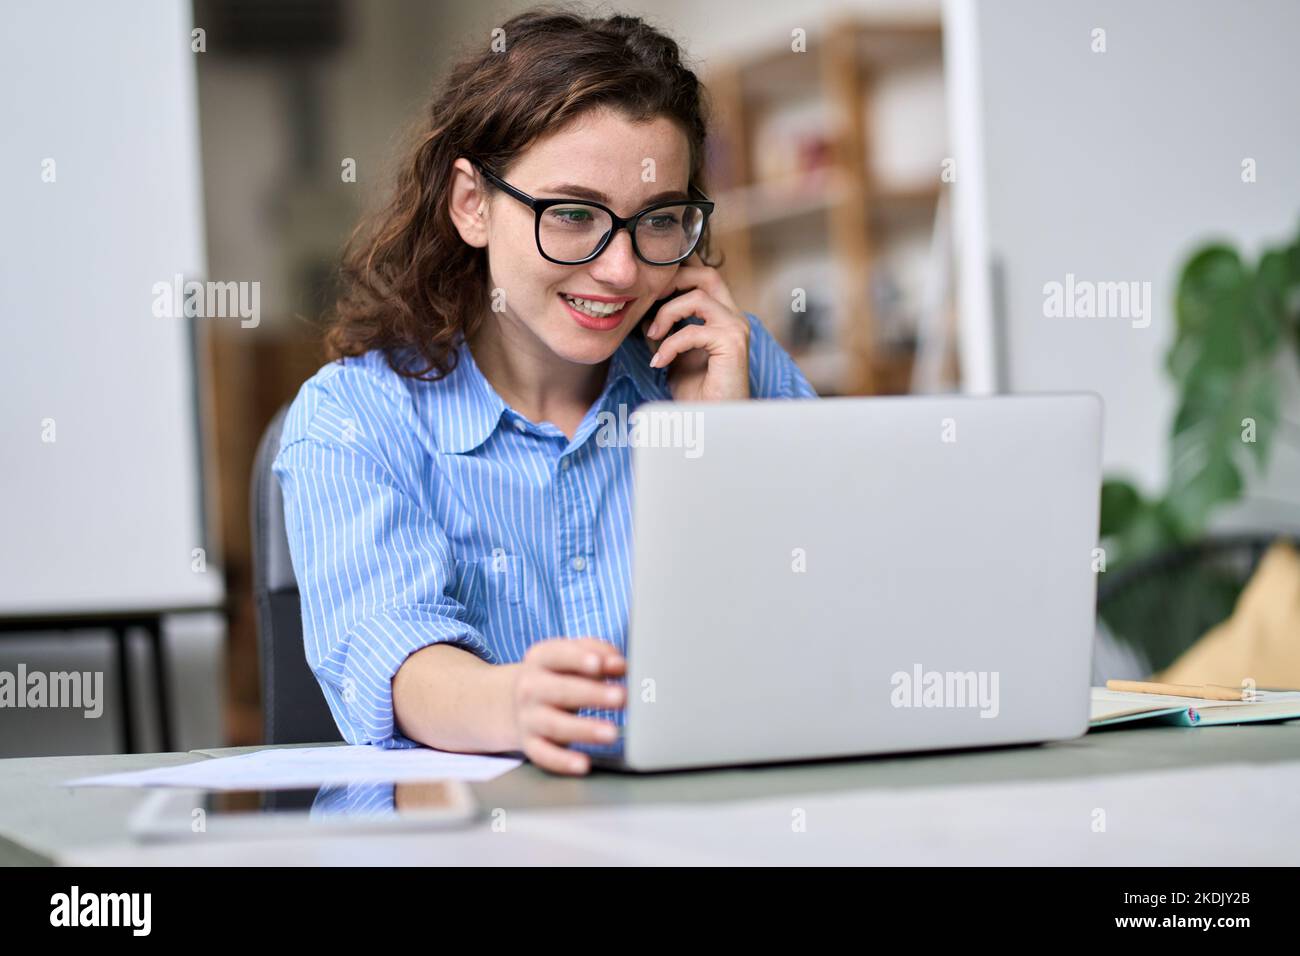 Young woman talking on the phone using laptop working online. Stock Photo